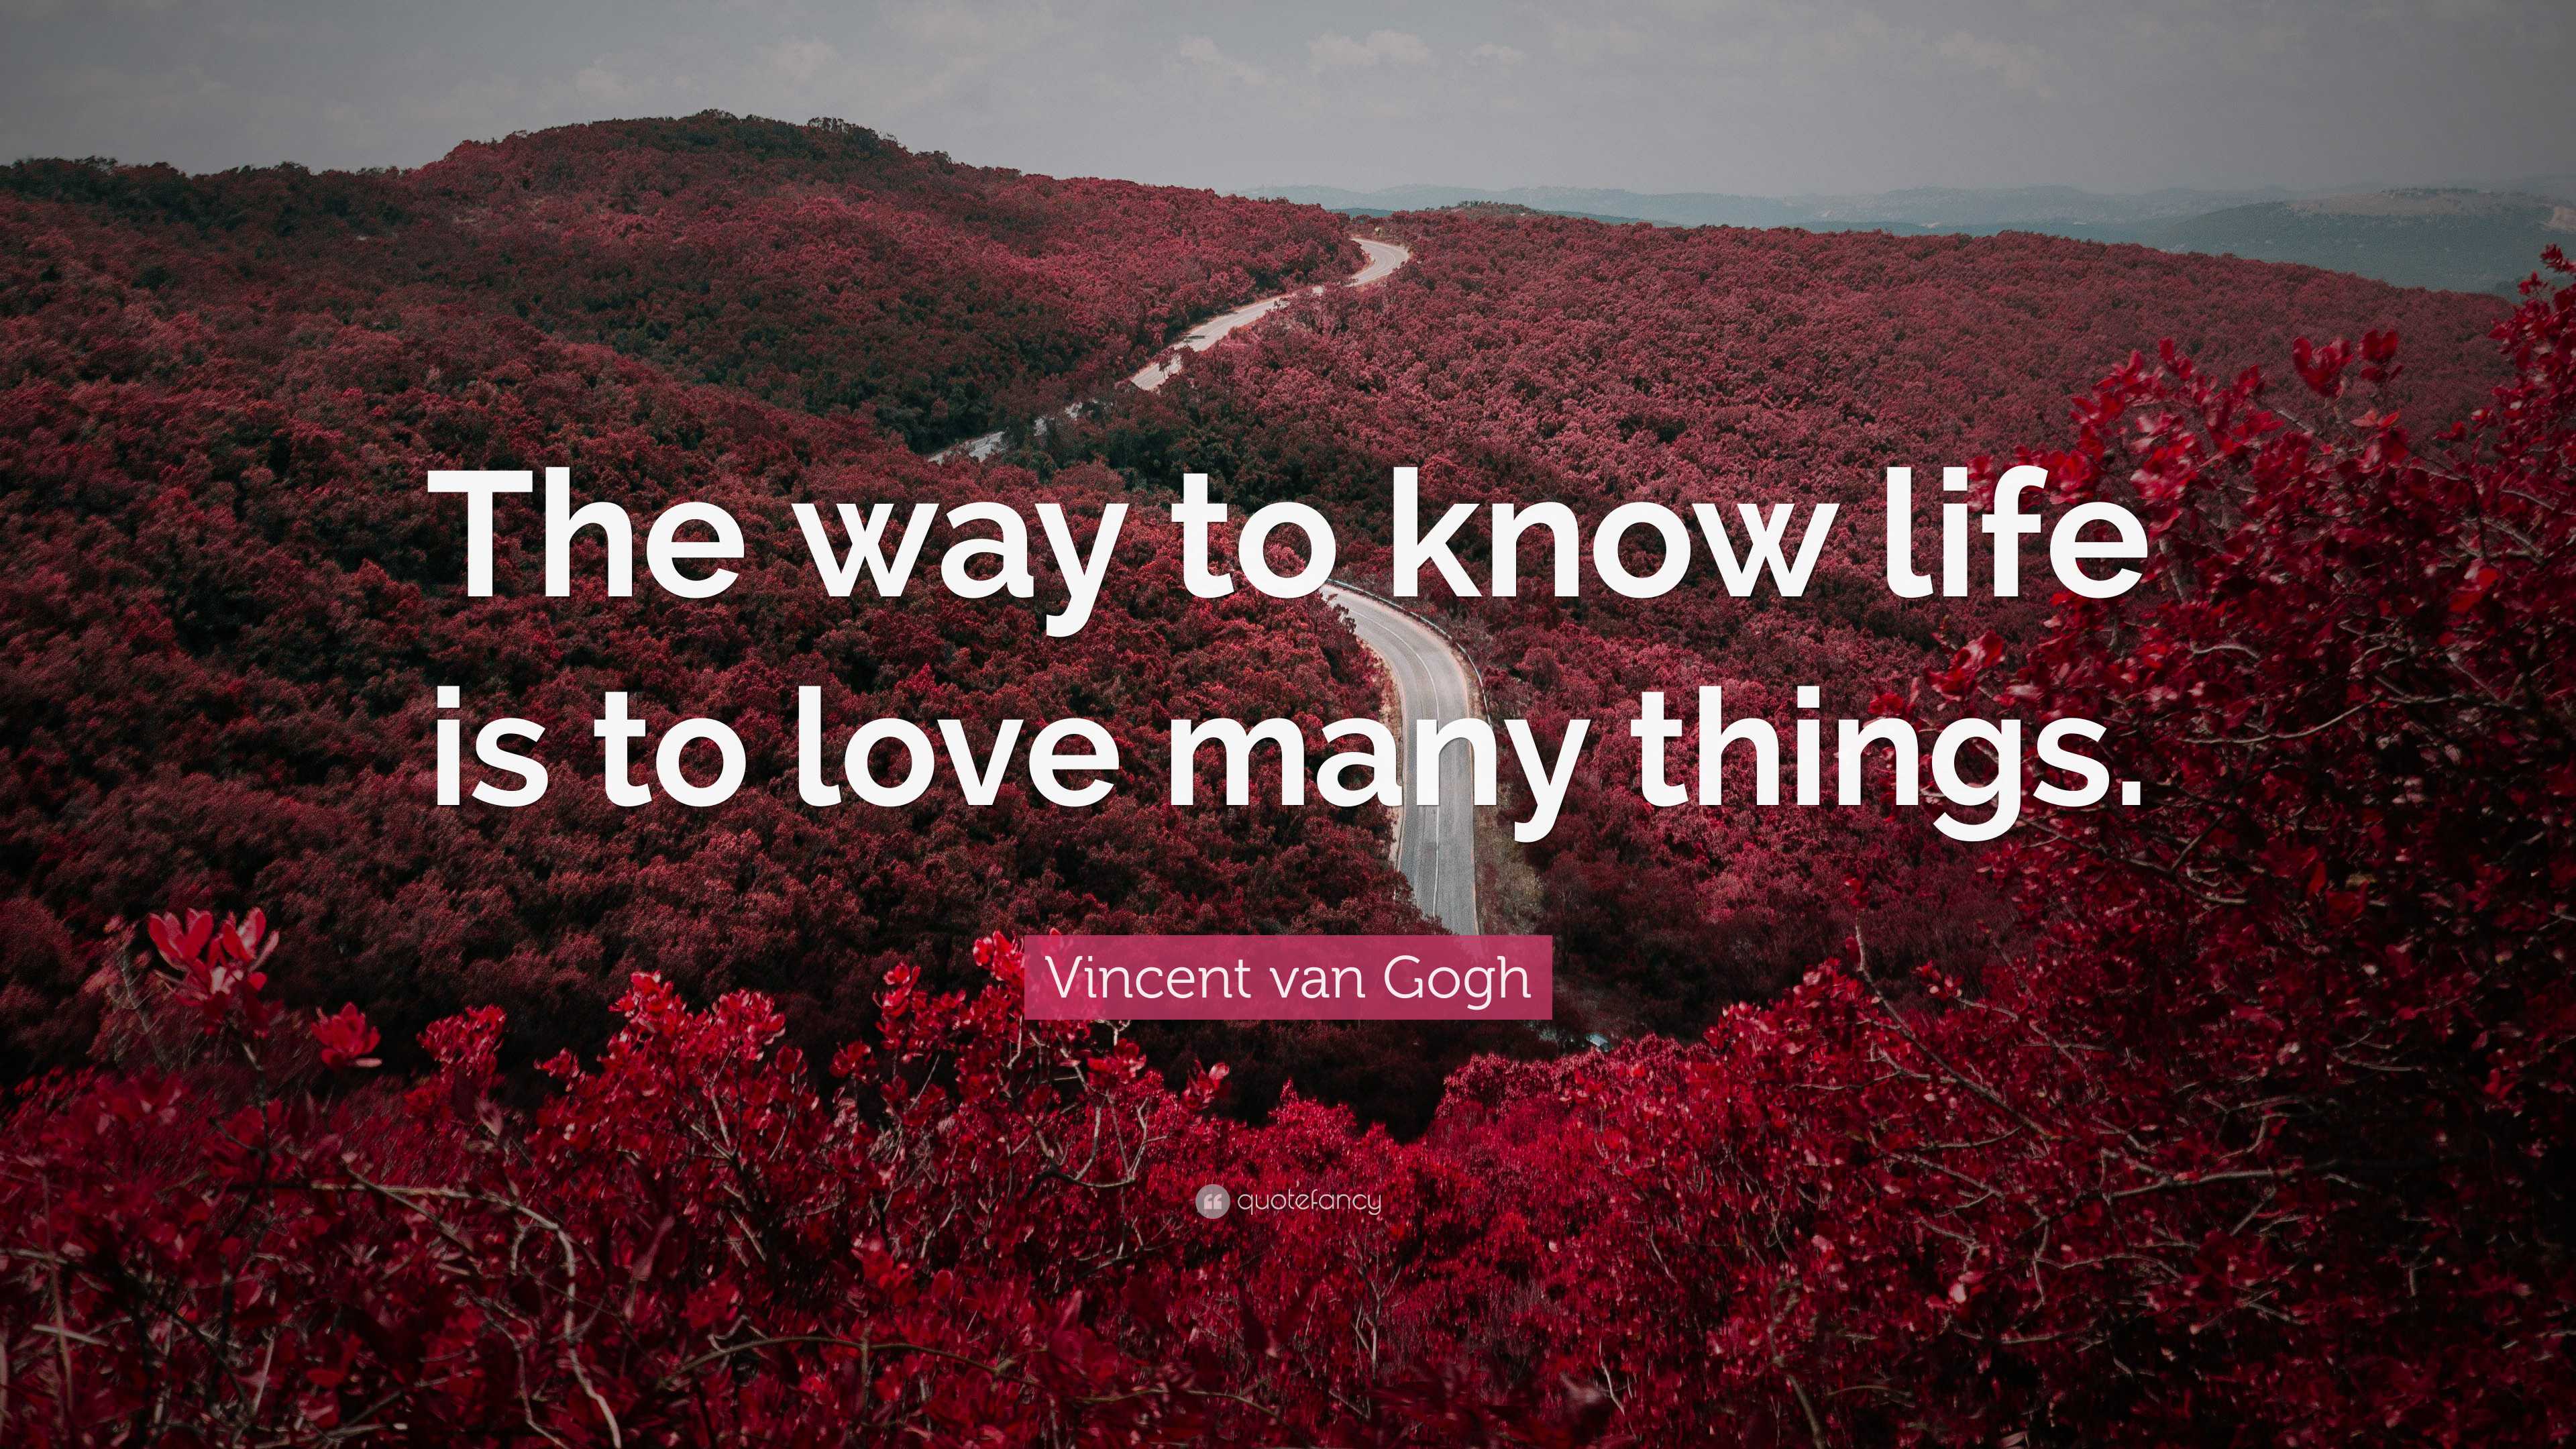 Vincent van Gogh Quote: “The way to know life is to love many things.”